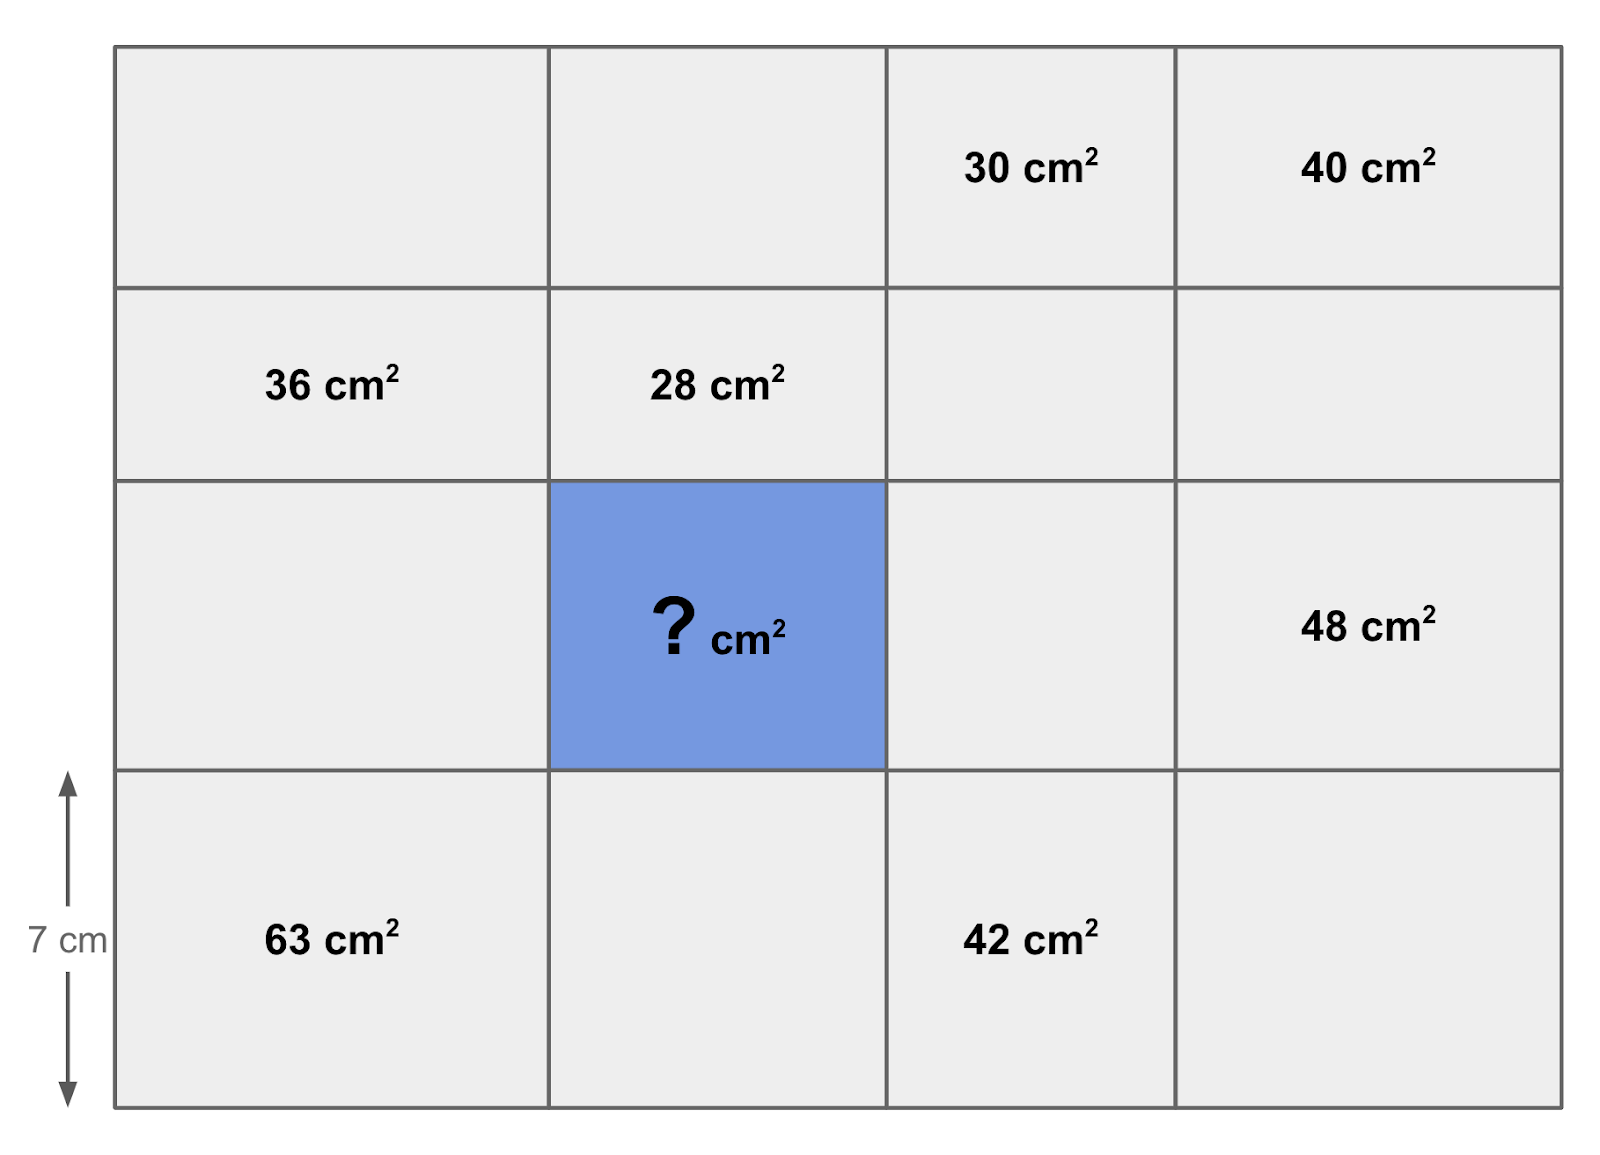 A 4x4 grid of different sized grey rectangles, with one near the middle coloured blue. Some areas are labelled: In the top row, the first two rectangles are blank, and the last two are labelled 30 square cm and 40 square cm. In the second row, the first two rectangles are labelled 36 square cm and 28 square cm, and the last two are blank. In the third row, the first rectangle is blank, the second is the blue rectangle labelled with a question mark, the third is blank, and the last is labelled 48 square cm. The bottom row has the first rectangle labelled 63 square cm, the second rectangle is blank, the third is labelled 42 square cm, and the last is blank. The only length labelled in the grid is the left hand side of the bottom row, which is 7 cm long.